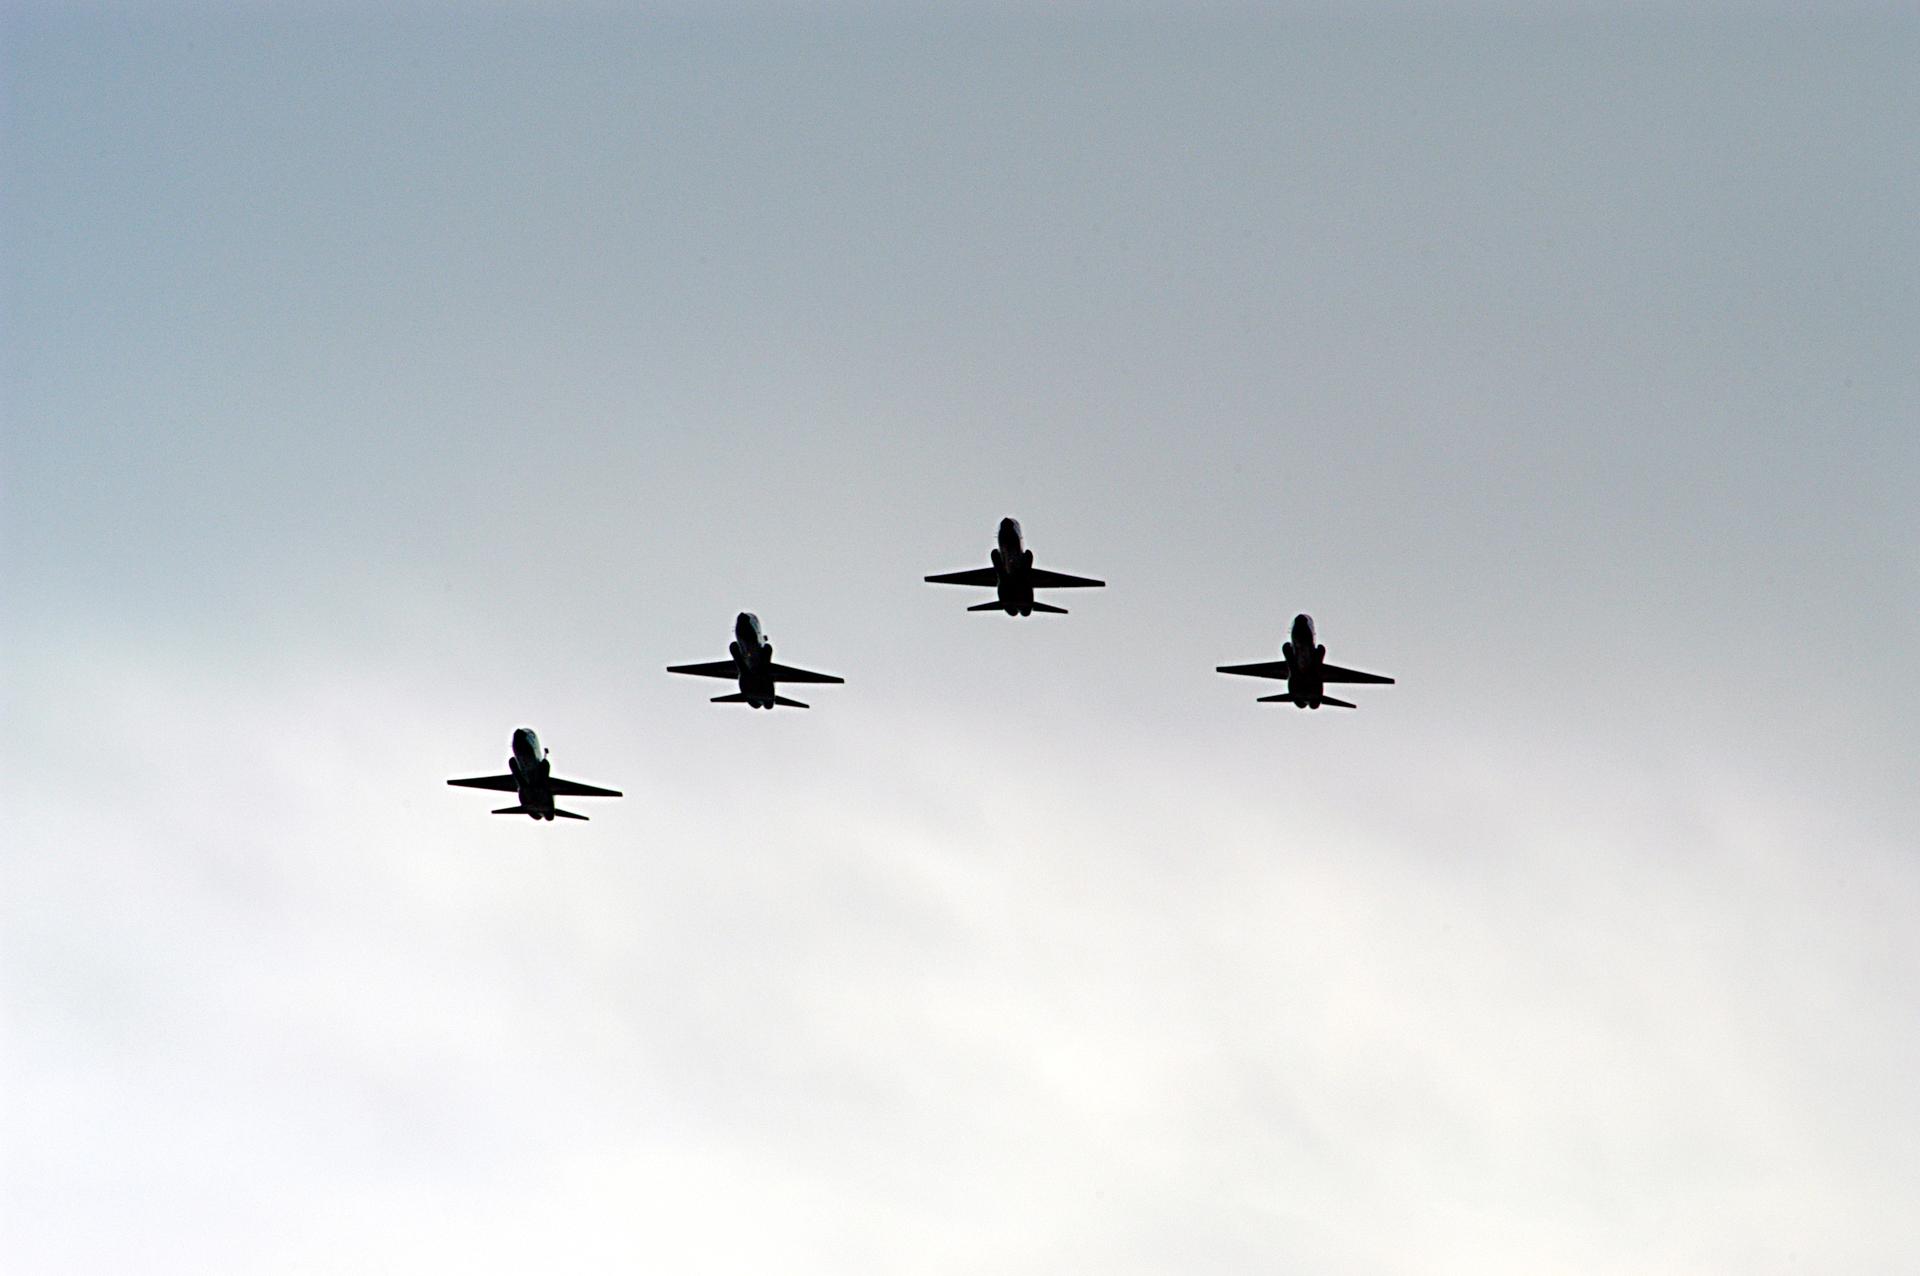 4 T-38 jets fly in formation where a 5th jet appears to be missing